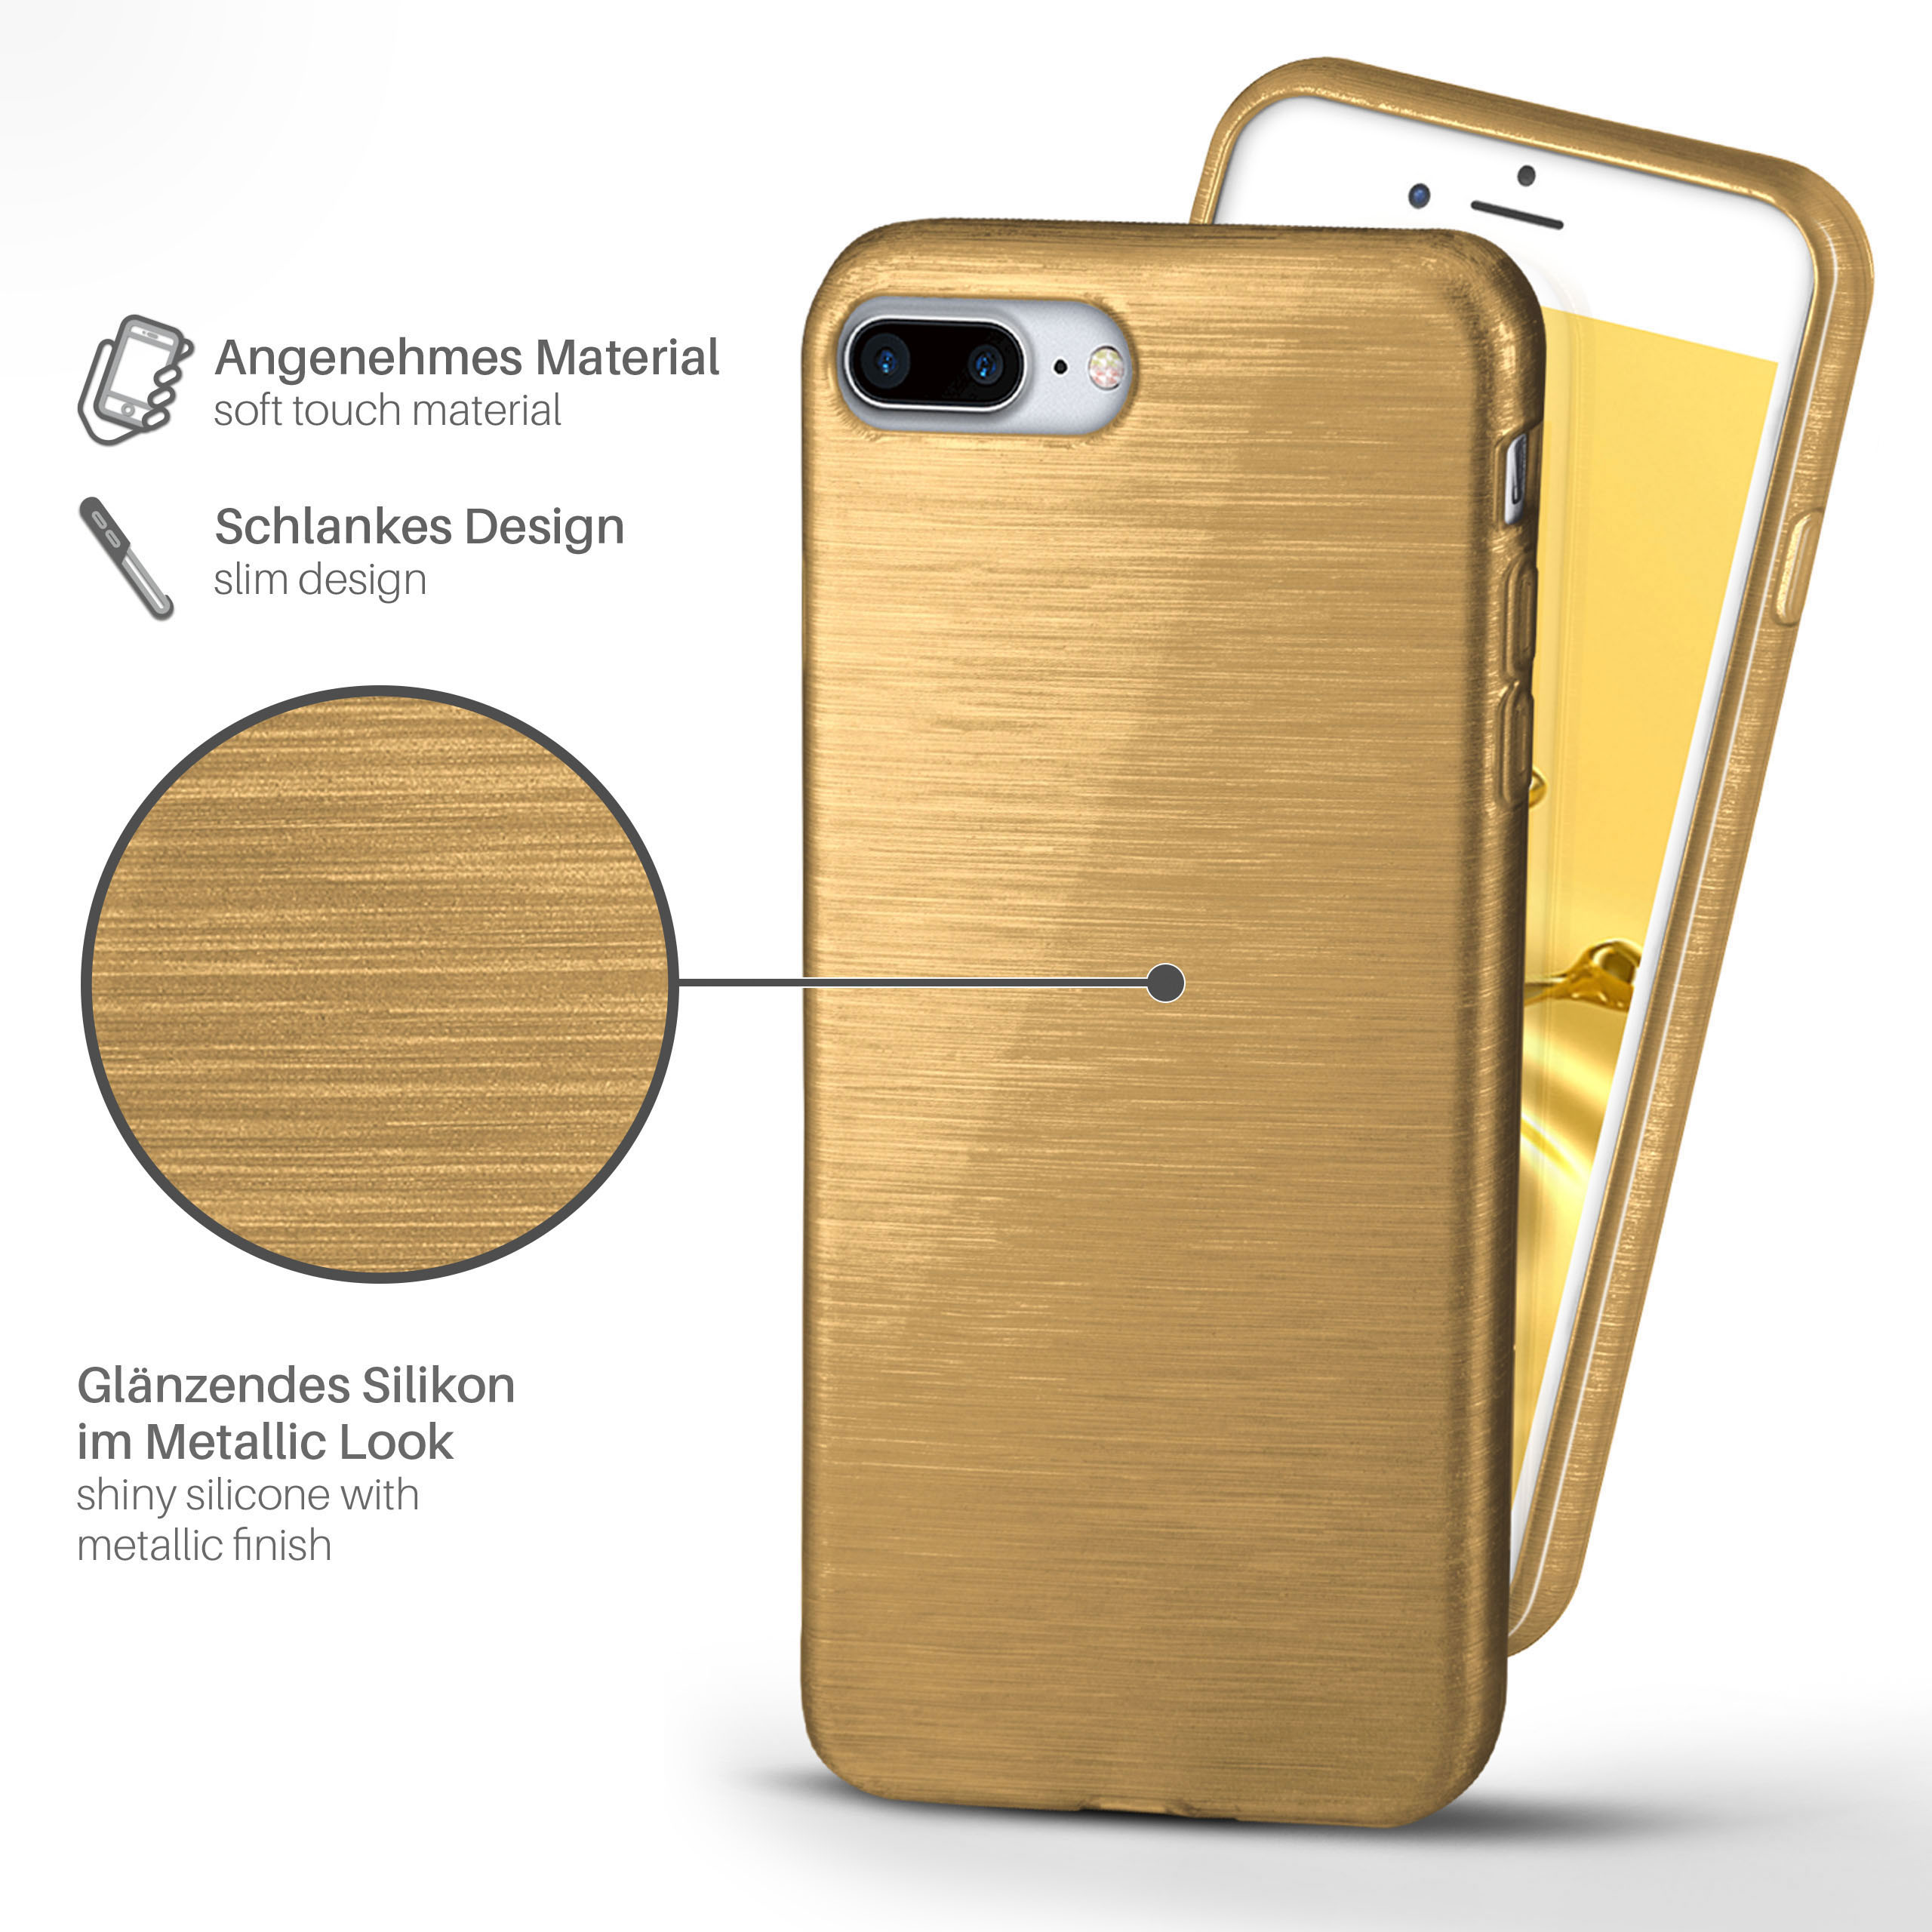 Plus 8 Brushed / MOEX Backcover, Case, iPhone iPhone 7 Apple, Ivory-Gold Plus,